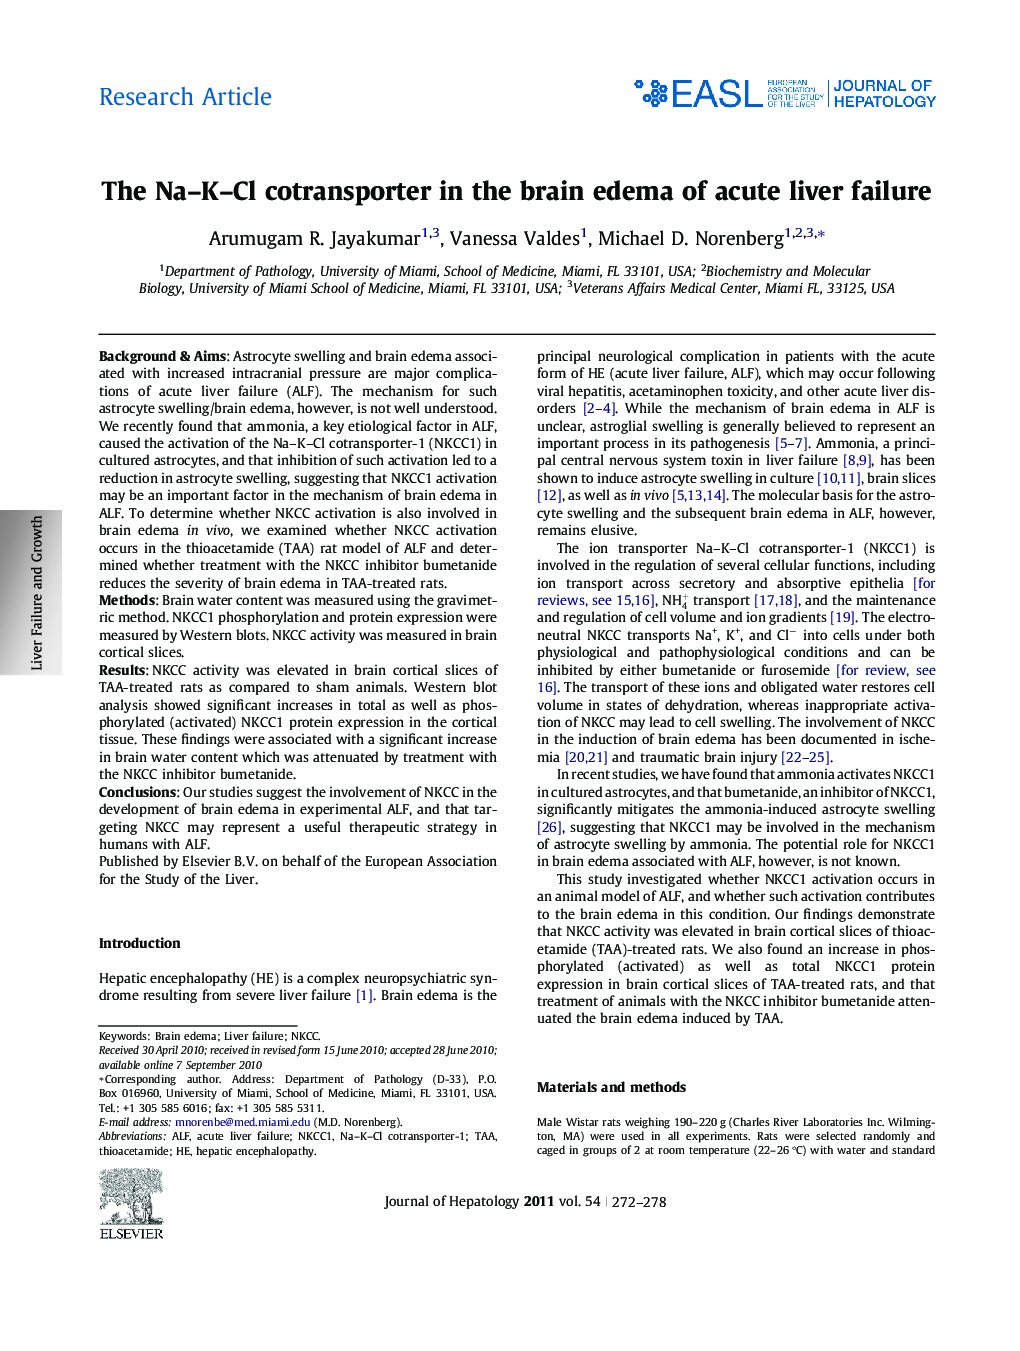 Research ArticleThe Na-K-Cl cotransporter in the brain edema of acute liver failure